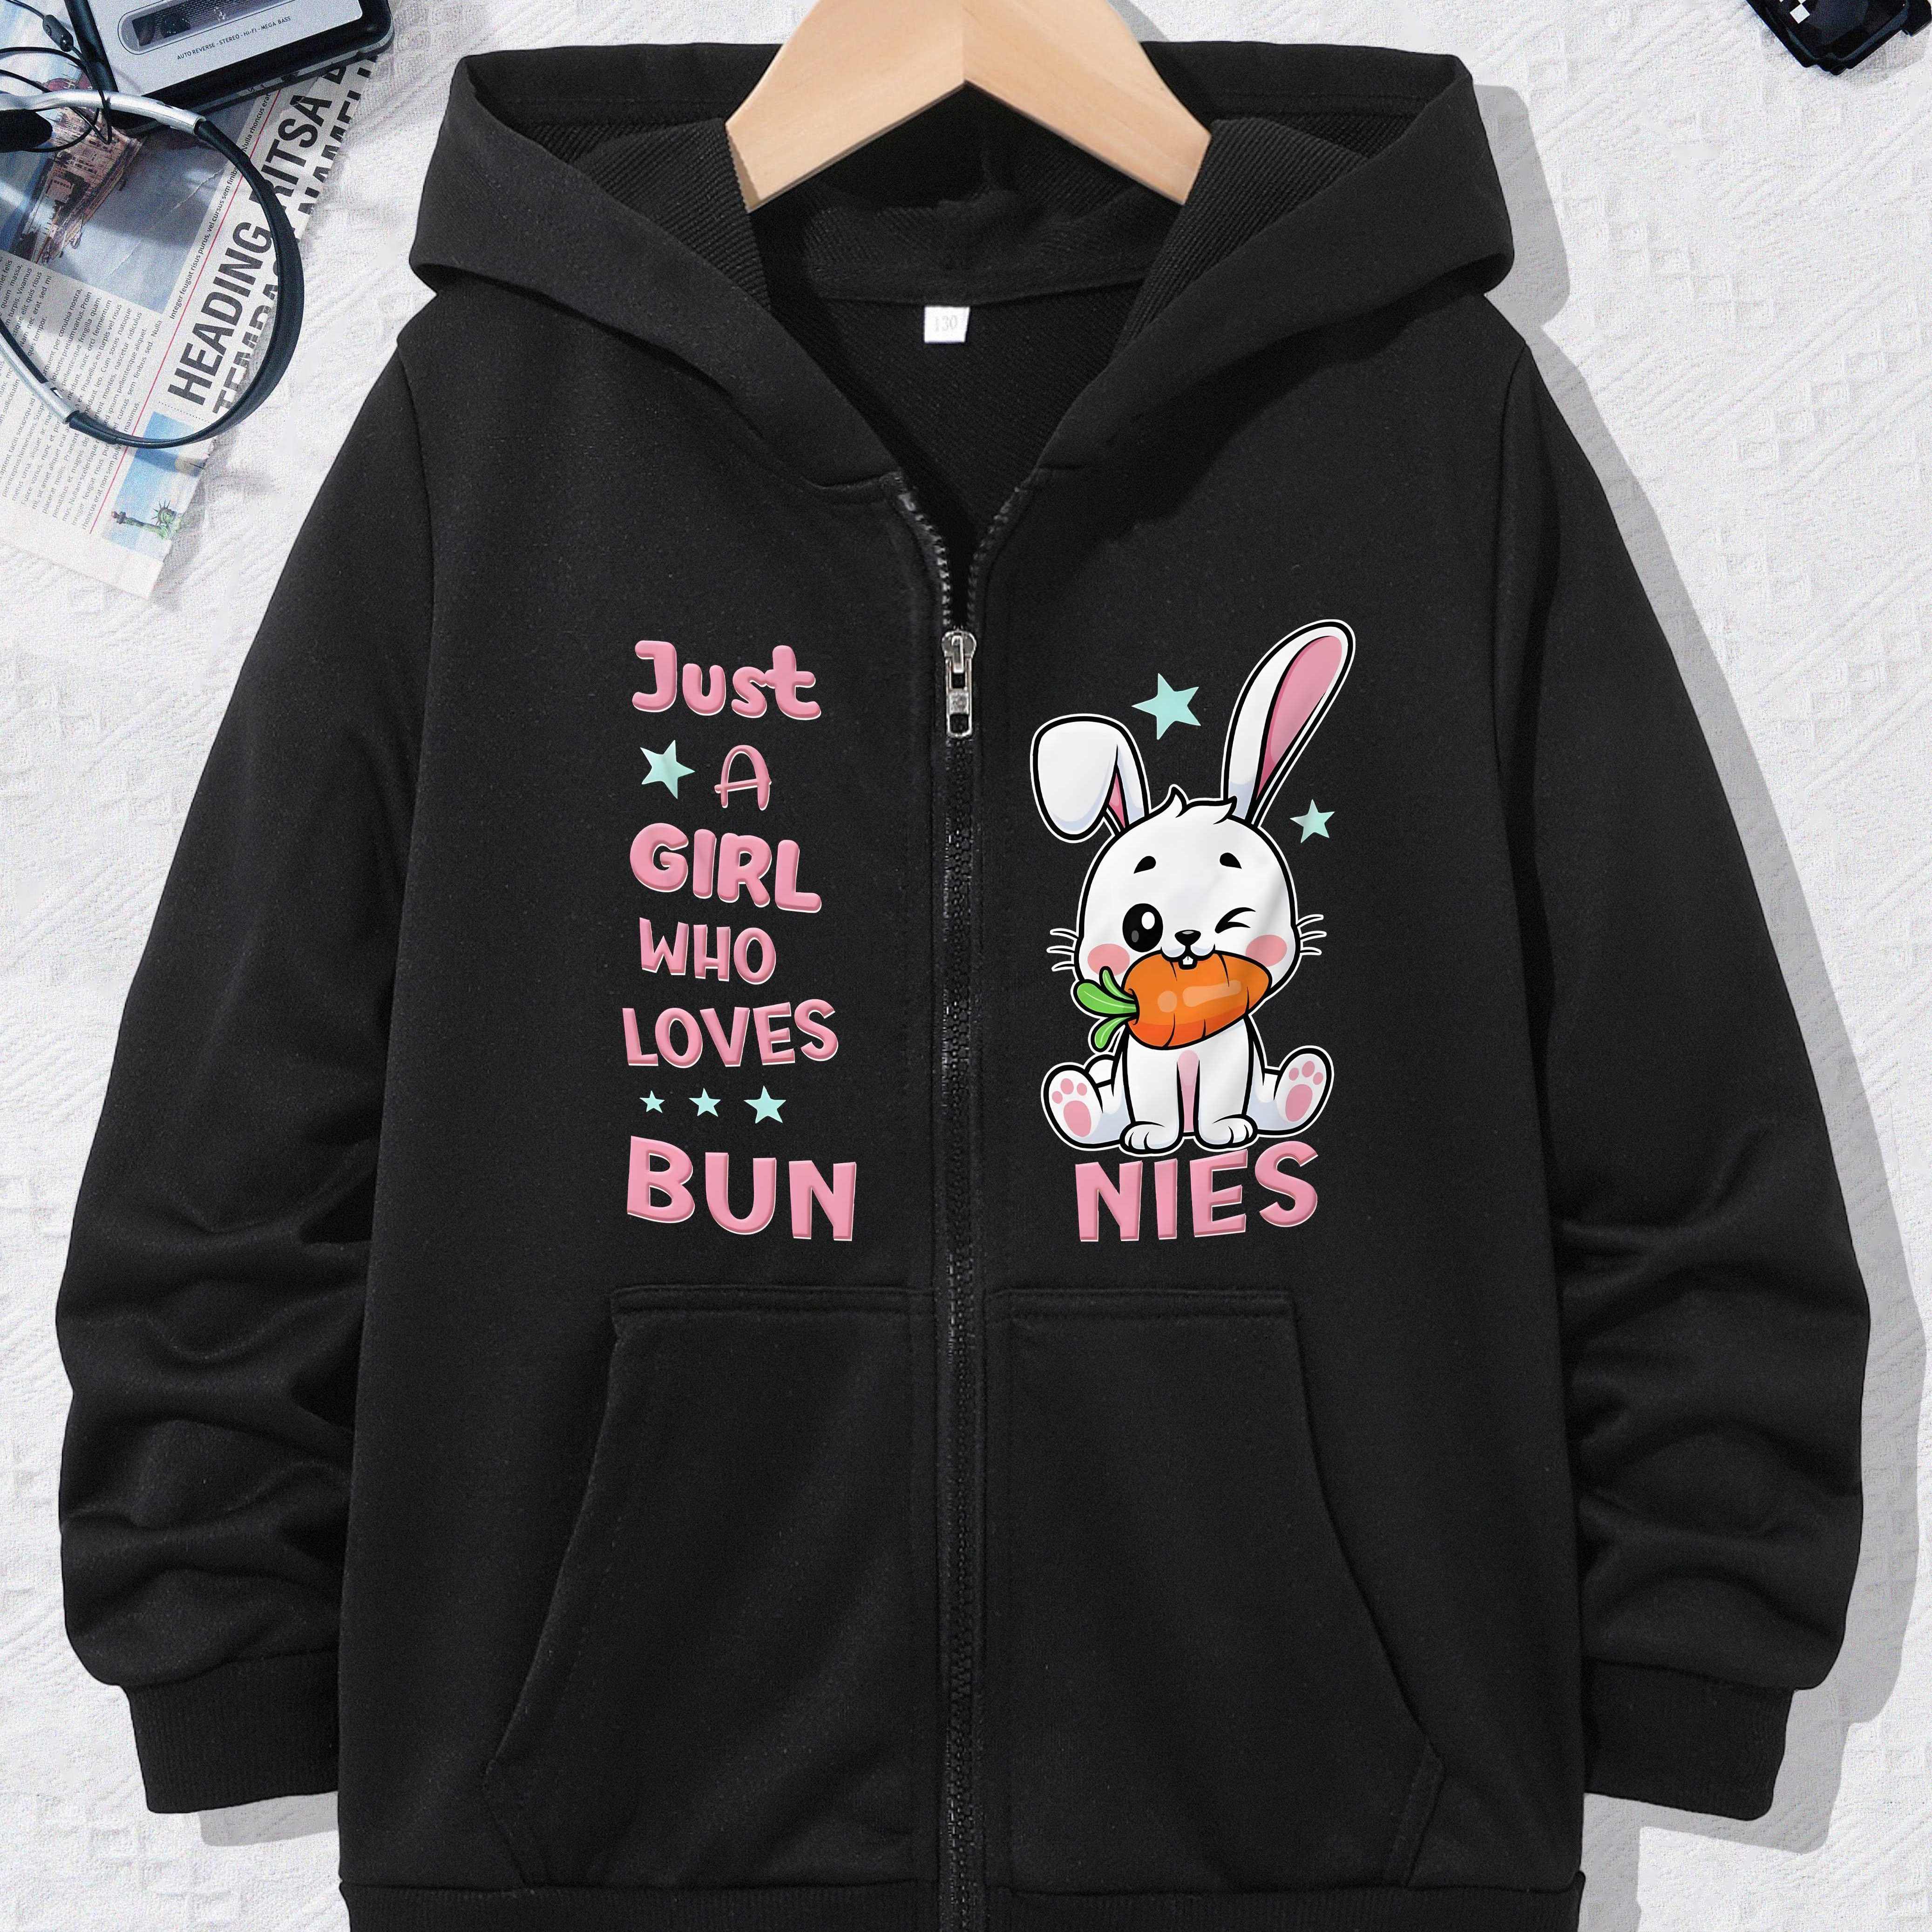 

Just A Girl Who Loves Buns And Cartoon Bunny Graphic Print, Girls' Casual Zip Up Hoodie, Long Sleeve Jacket Sweatshirt With Pockets For Fall And Winter